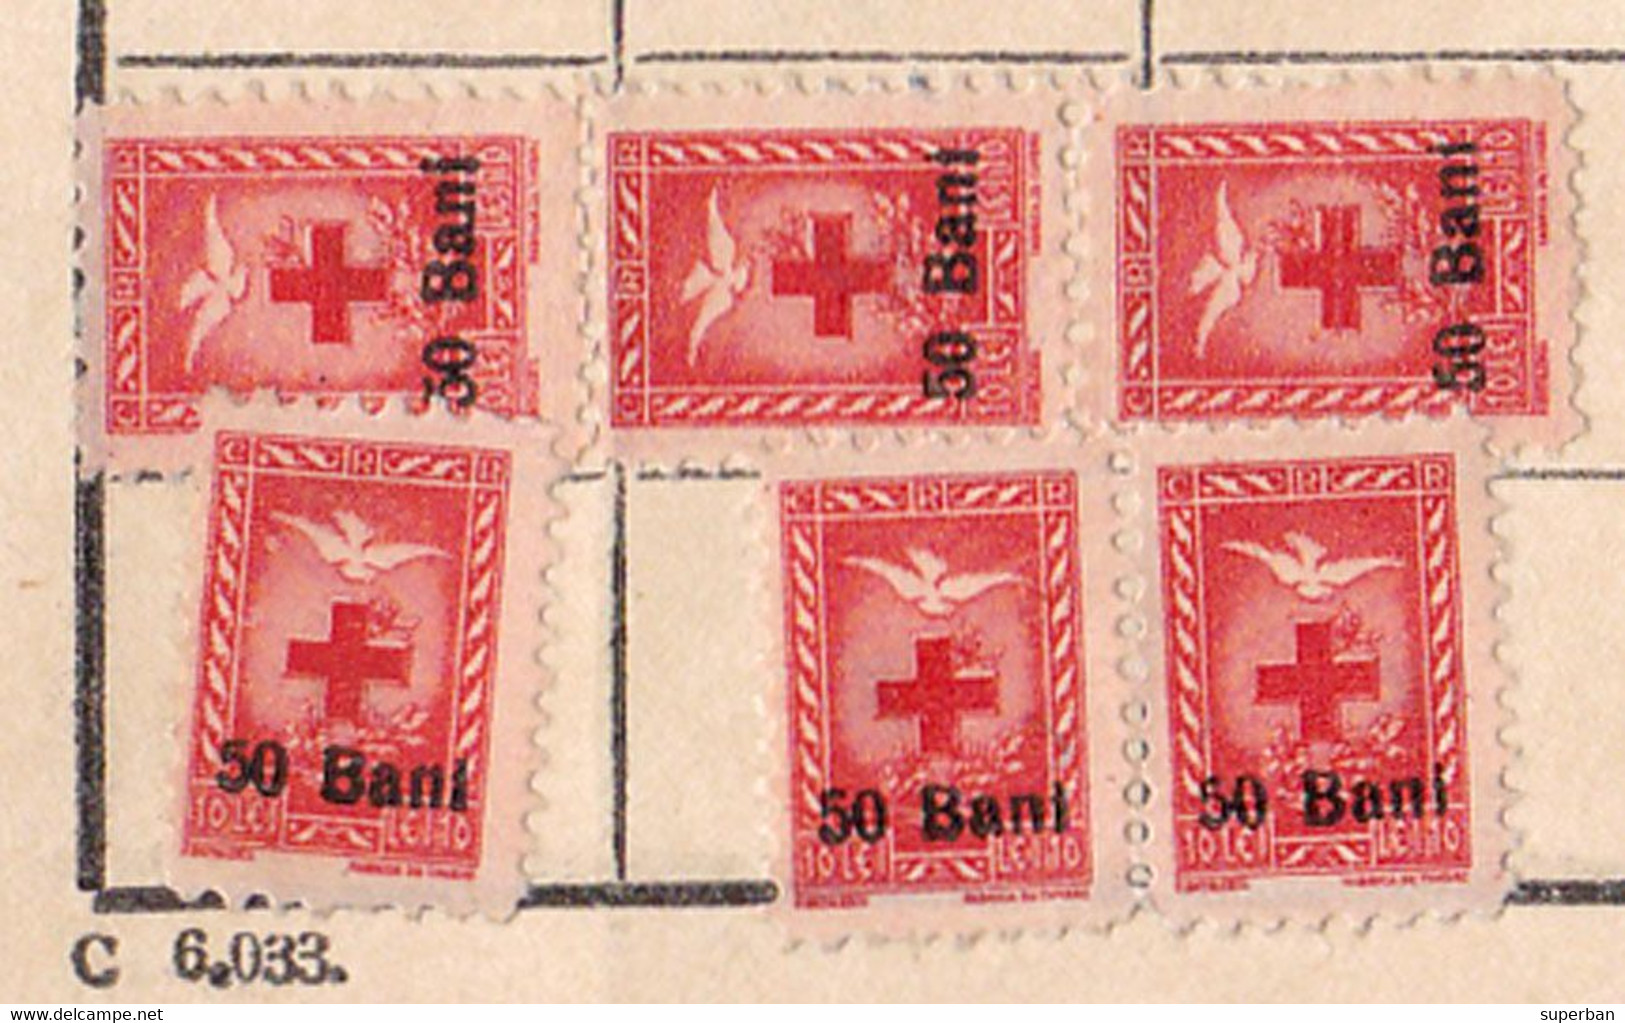 CRUCEA ROSIE / CROIX ROUGE / RED CROSS - DUES TICKET - 9 TIMBRES : 50 BANI / 10 LEI - 1952 / 1953 - CINDERELLA (ai406) - Steuermarken